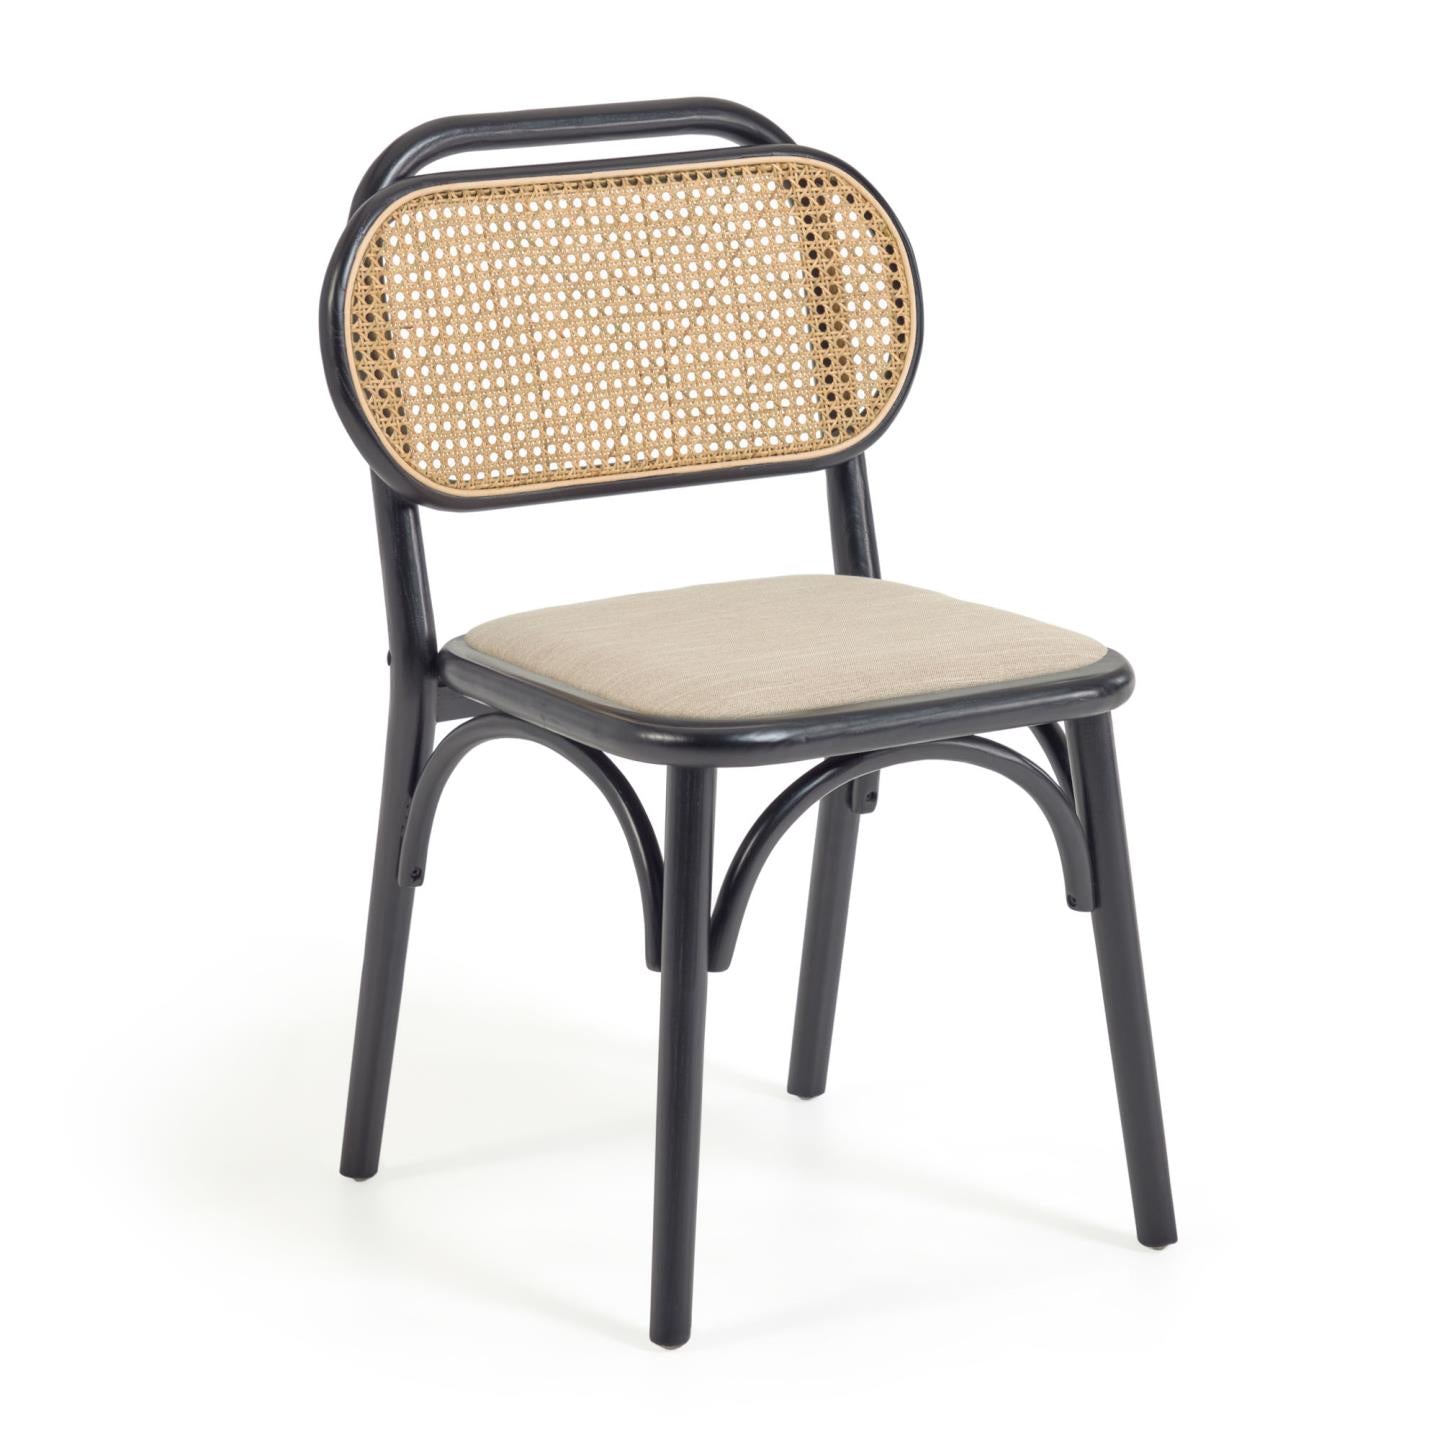 Doriane solid elm chair with black lacquer and upholstered seat